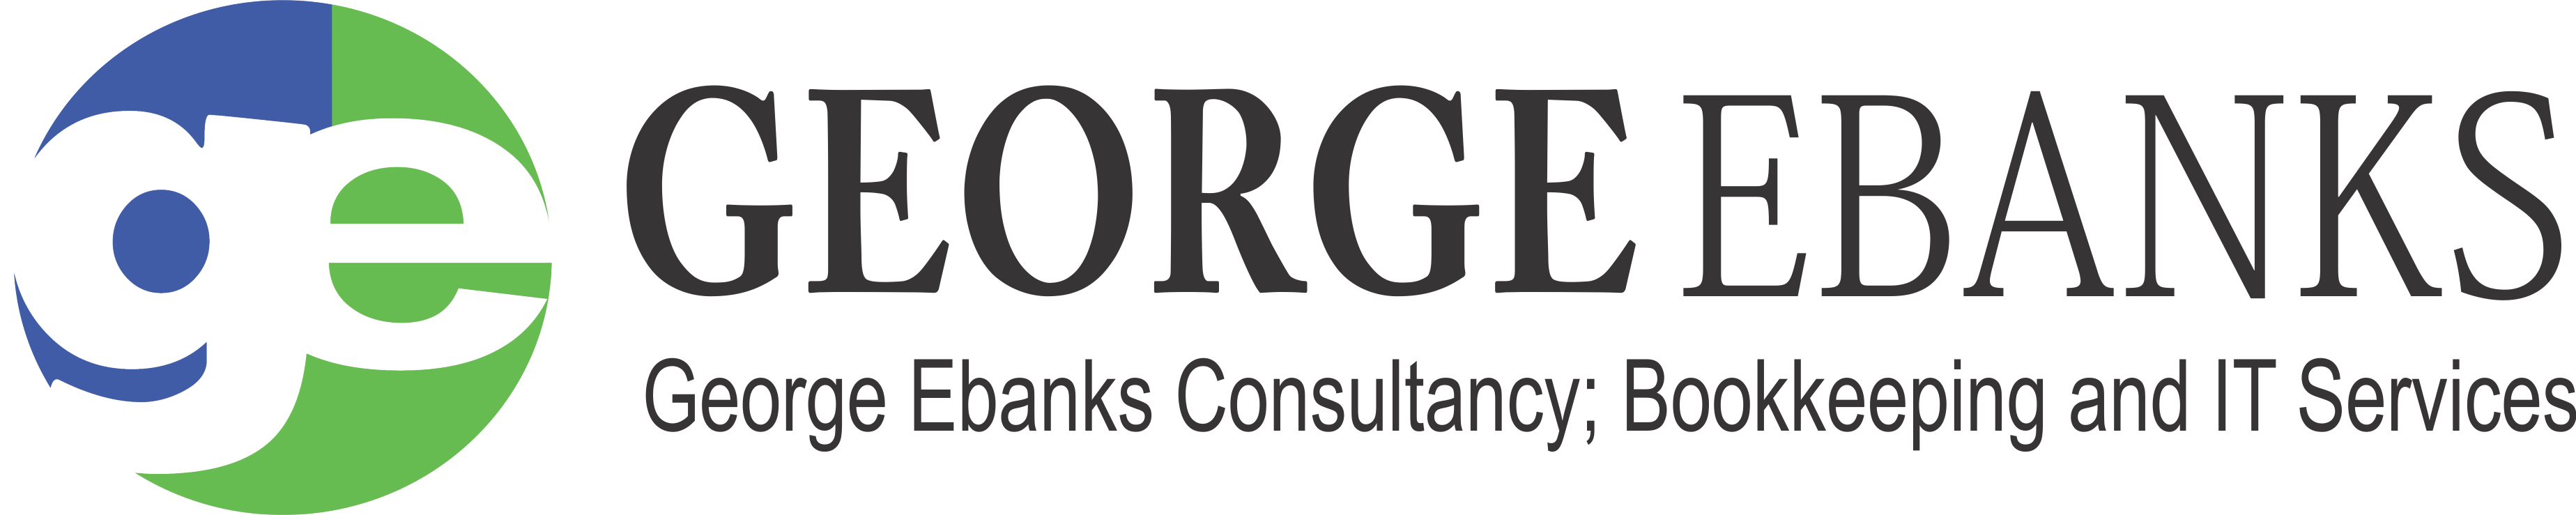 George Ebanks Business Consulting & Immigration Work